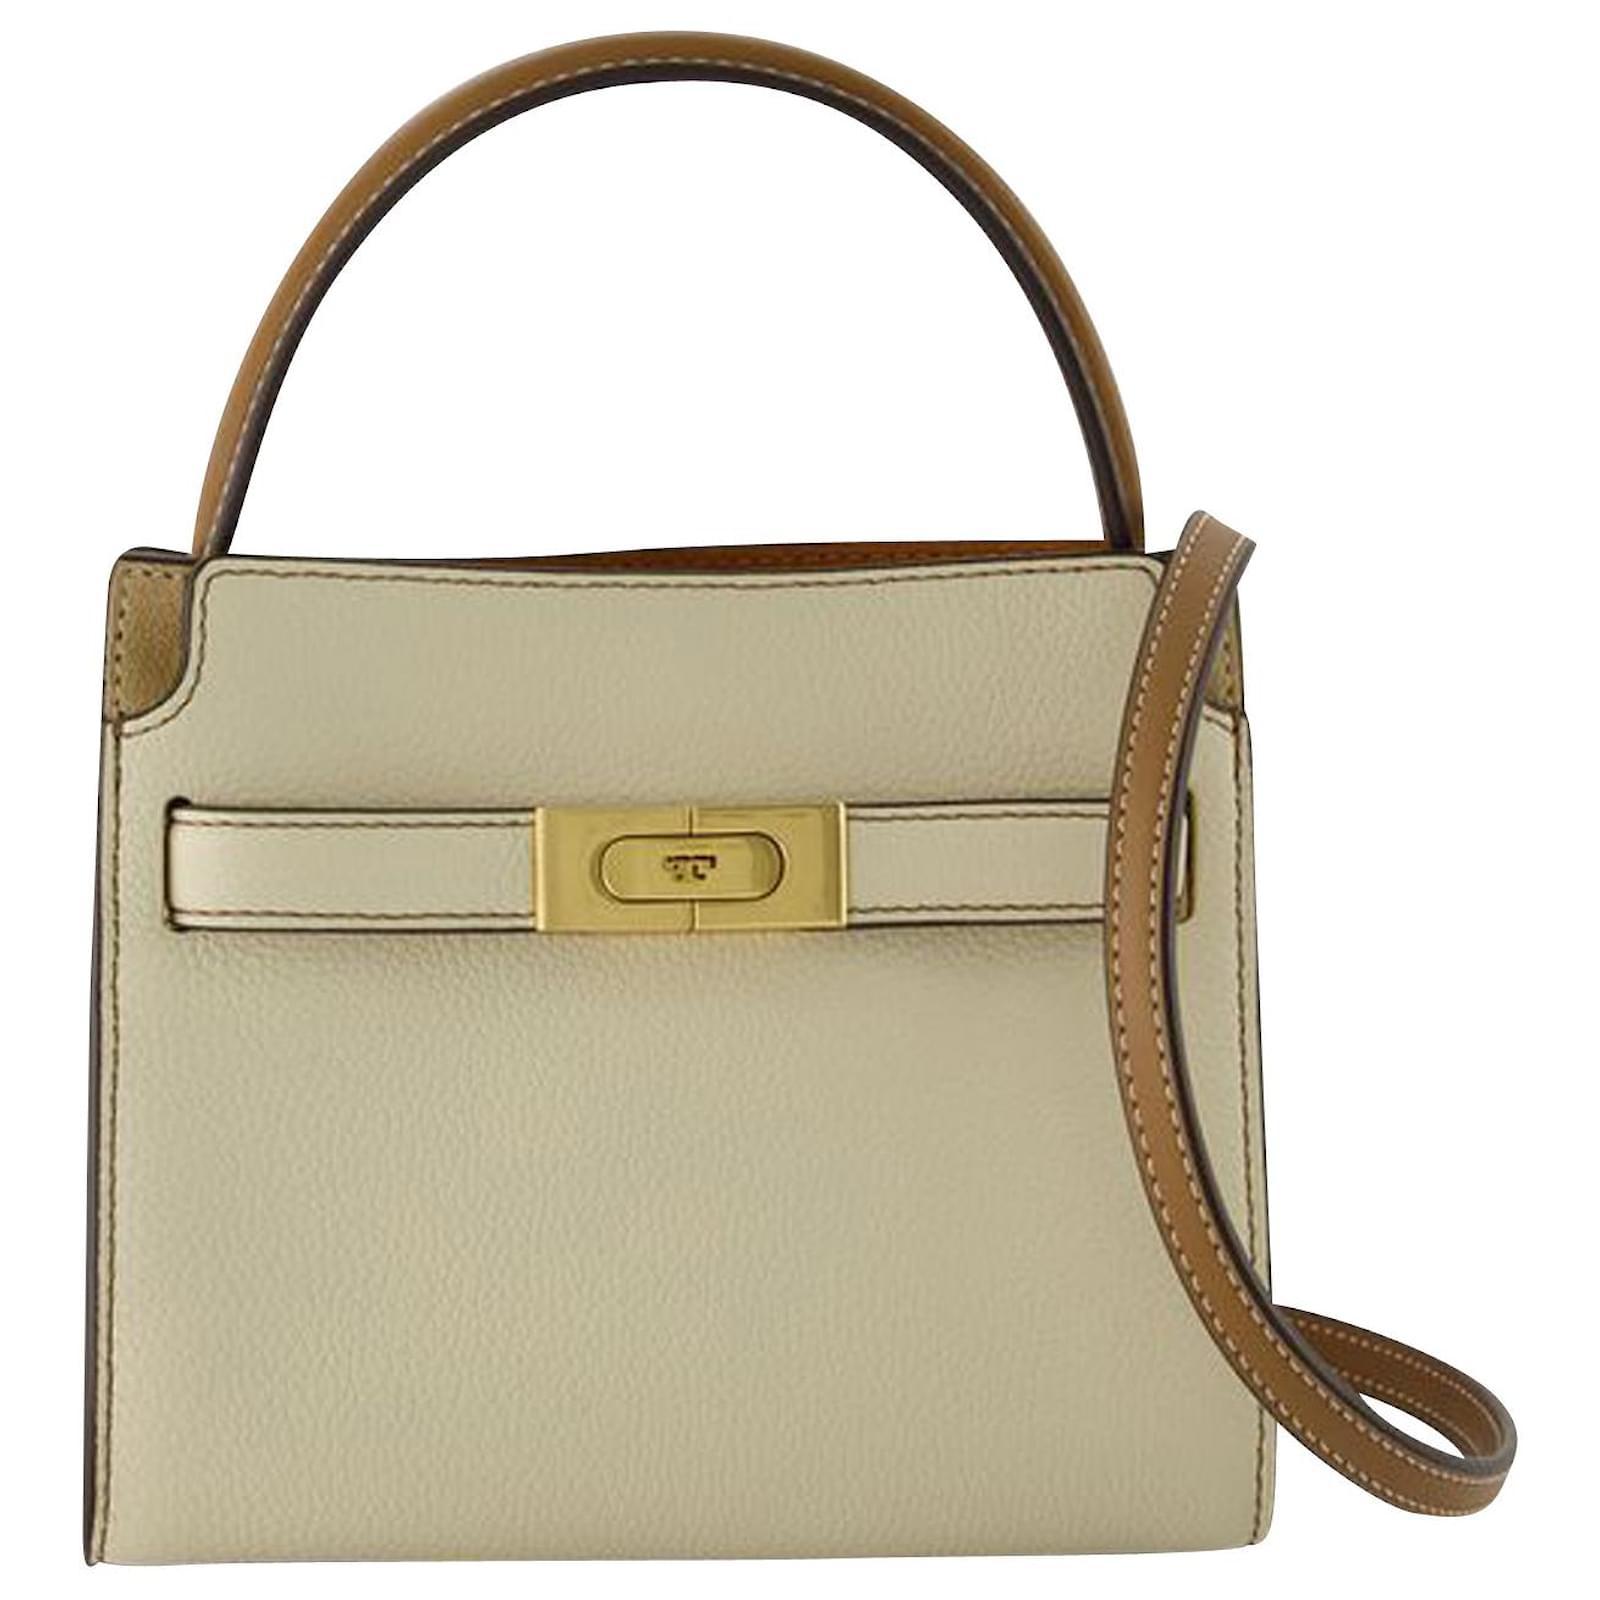 Tory Burch Small Lee Radziwill Double Bag in Beige Leather ref.723350 ...